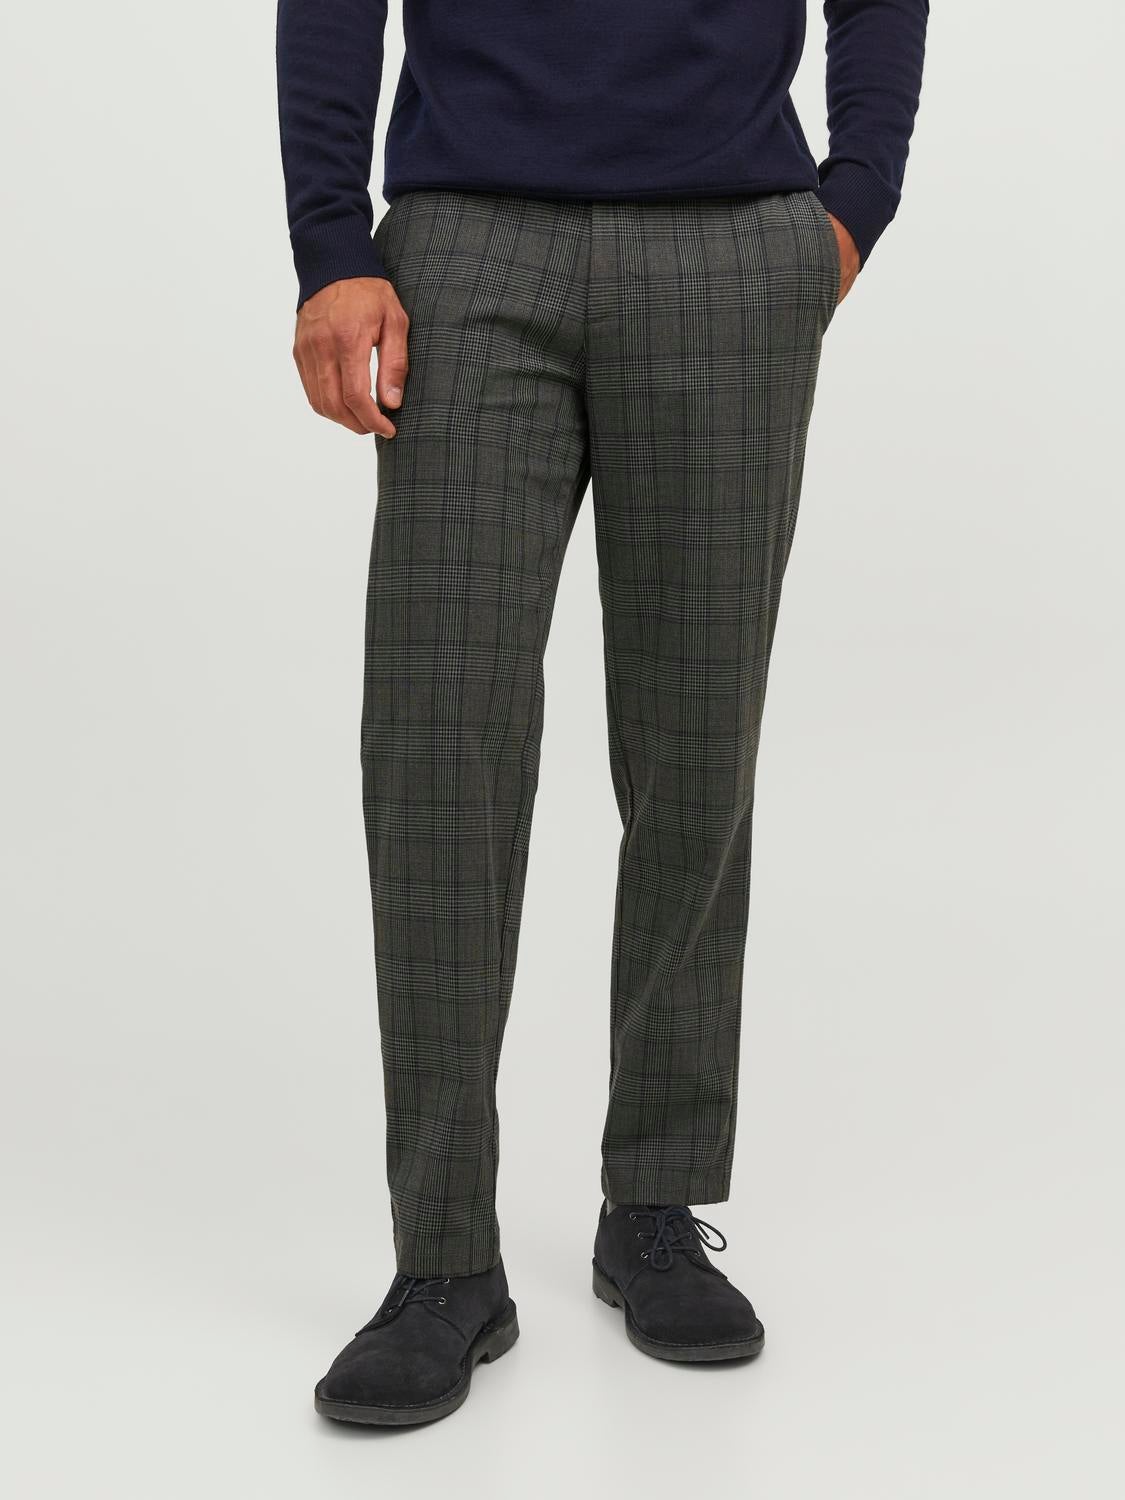 Baltic Sea Blue with Tuna Navy Blue Checkered Wool Rich Pant | Double  breasted suit, Blue checkered, Double breasted